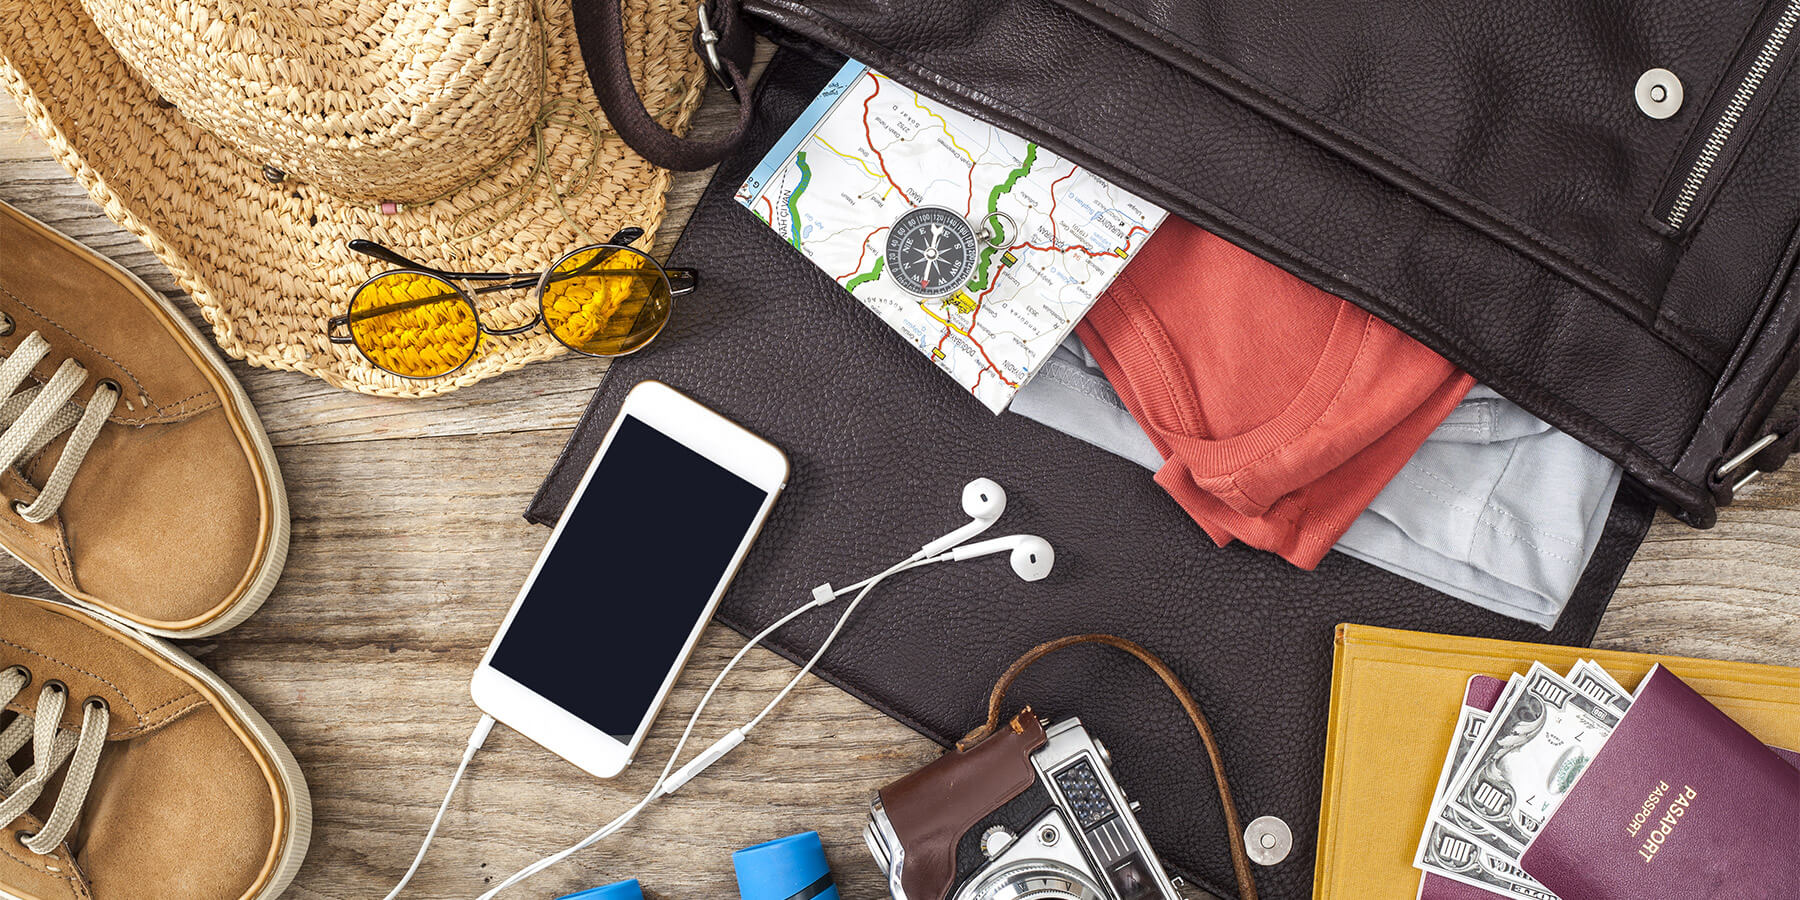 Travel Accessrories Laid out on Wooden Table